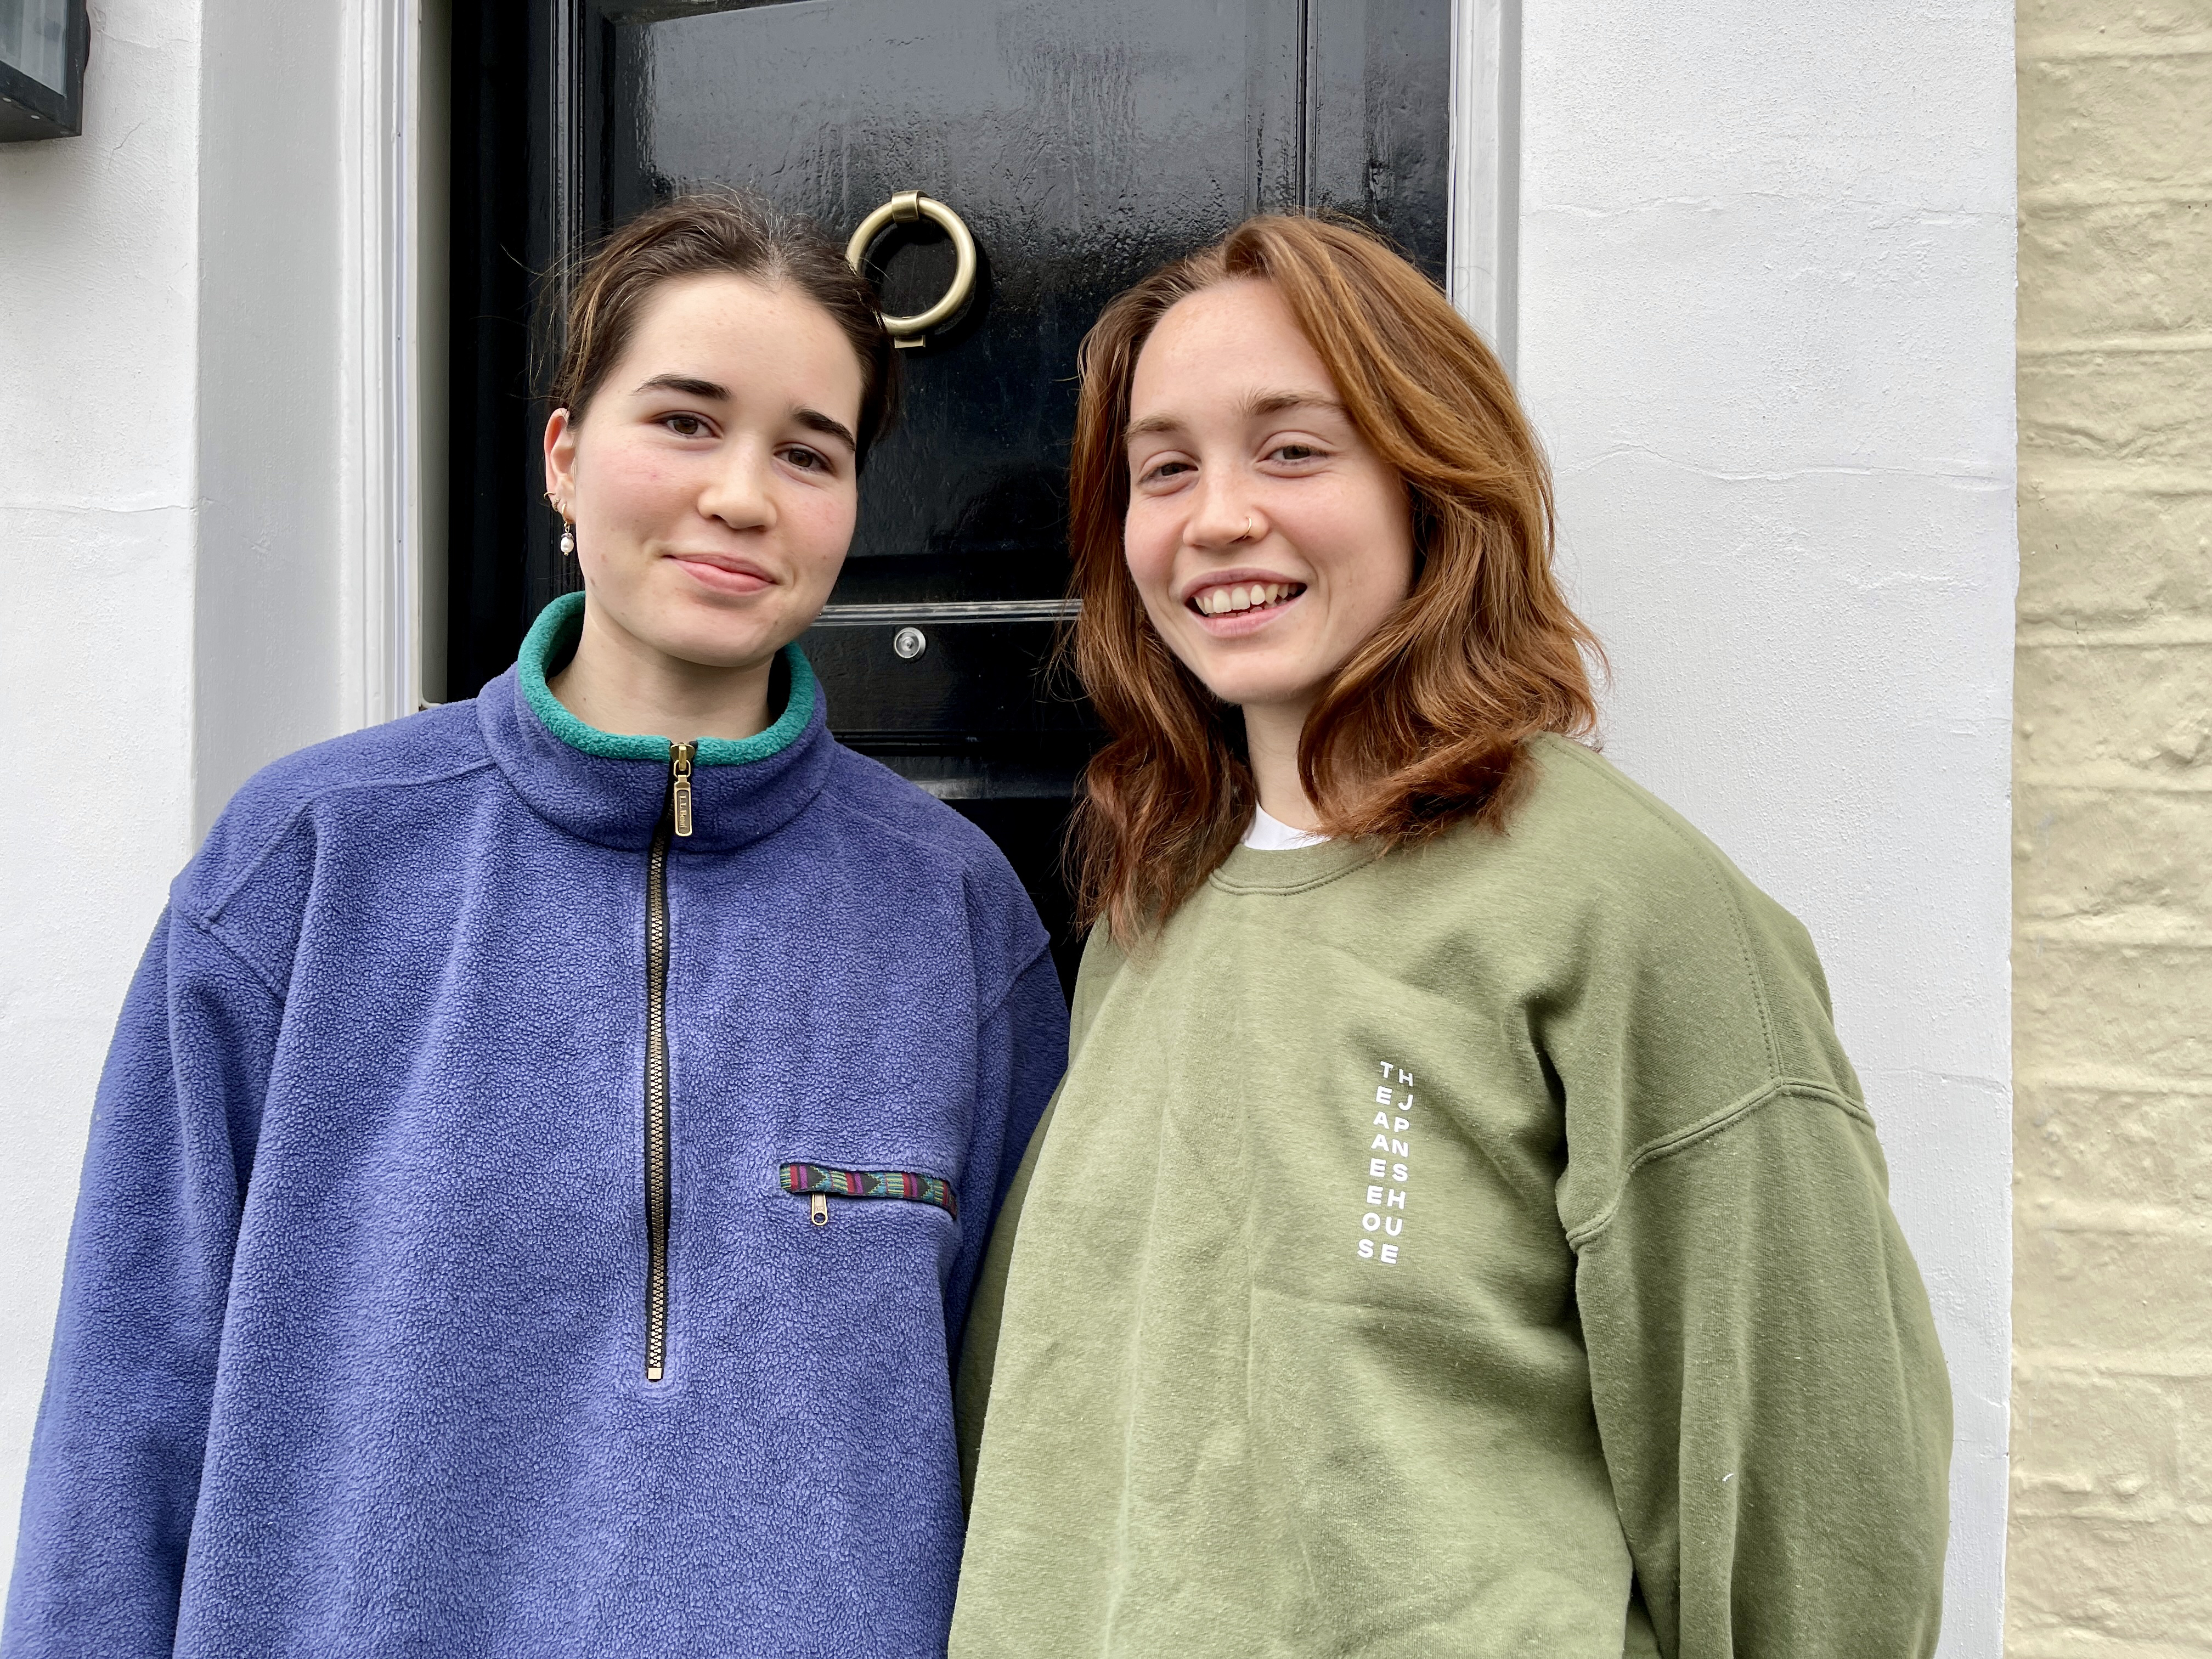 Lucy (left) and Sophie (right) live in a blue home and said it can be awkward when people look inside their home